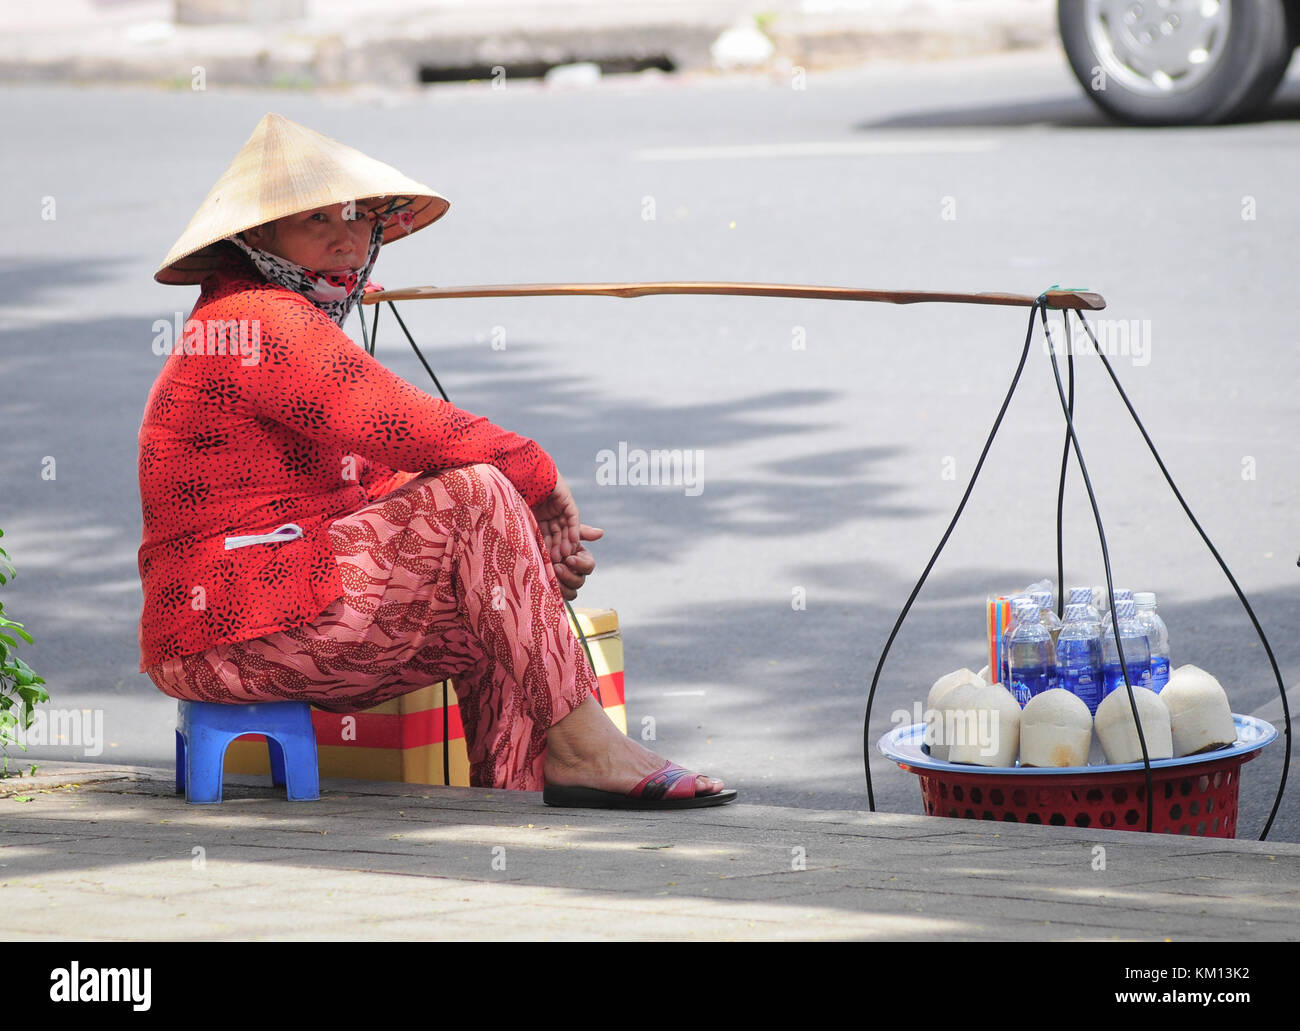 HO CHI MINH CITY, VIETNAM - JUNE 2, 2015. Unidentified street vendor selling coconuts in Ho Chi Minh City, Vietnam. Vietnam produces over 1 million to Stock Photo